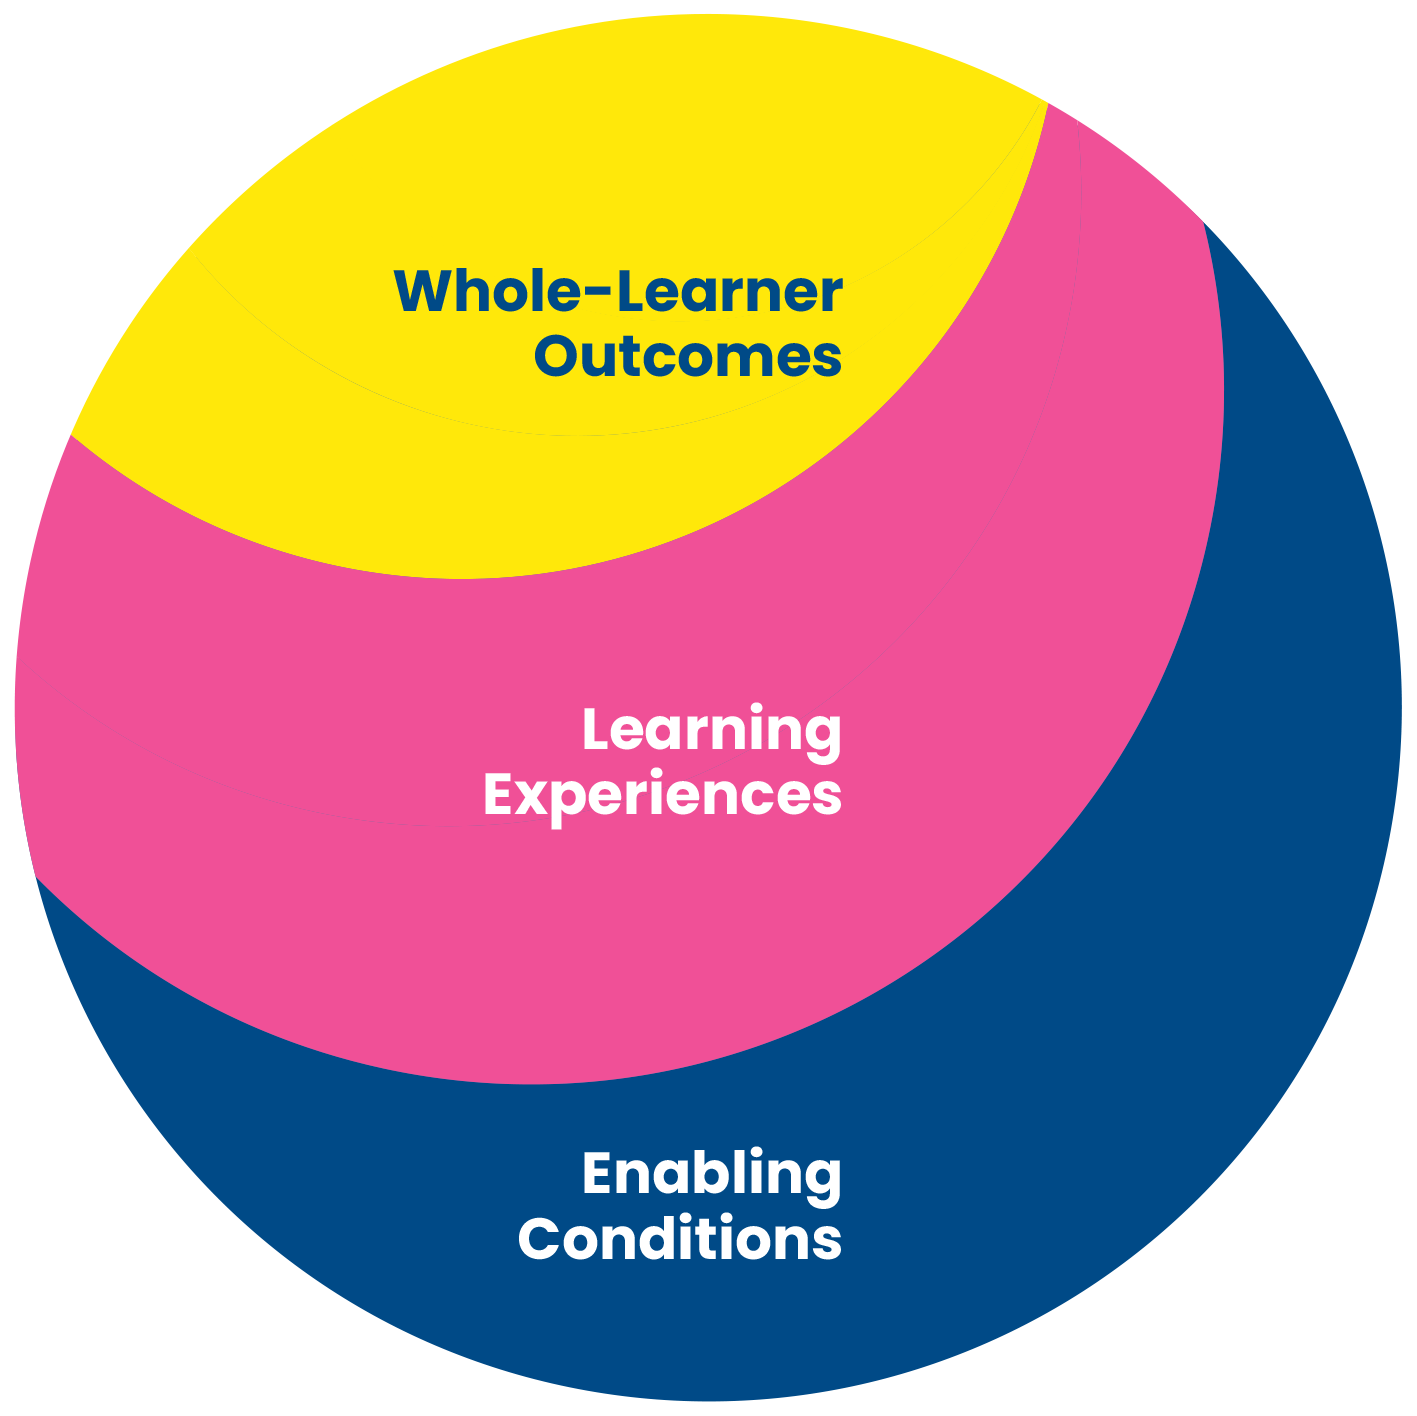 Learner-Centered Framework model|whole-learner outcomes, learning experiences, and enabling conditions